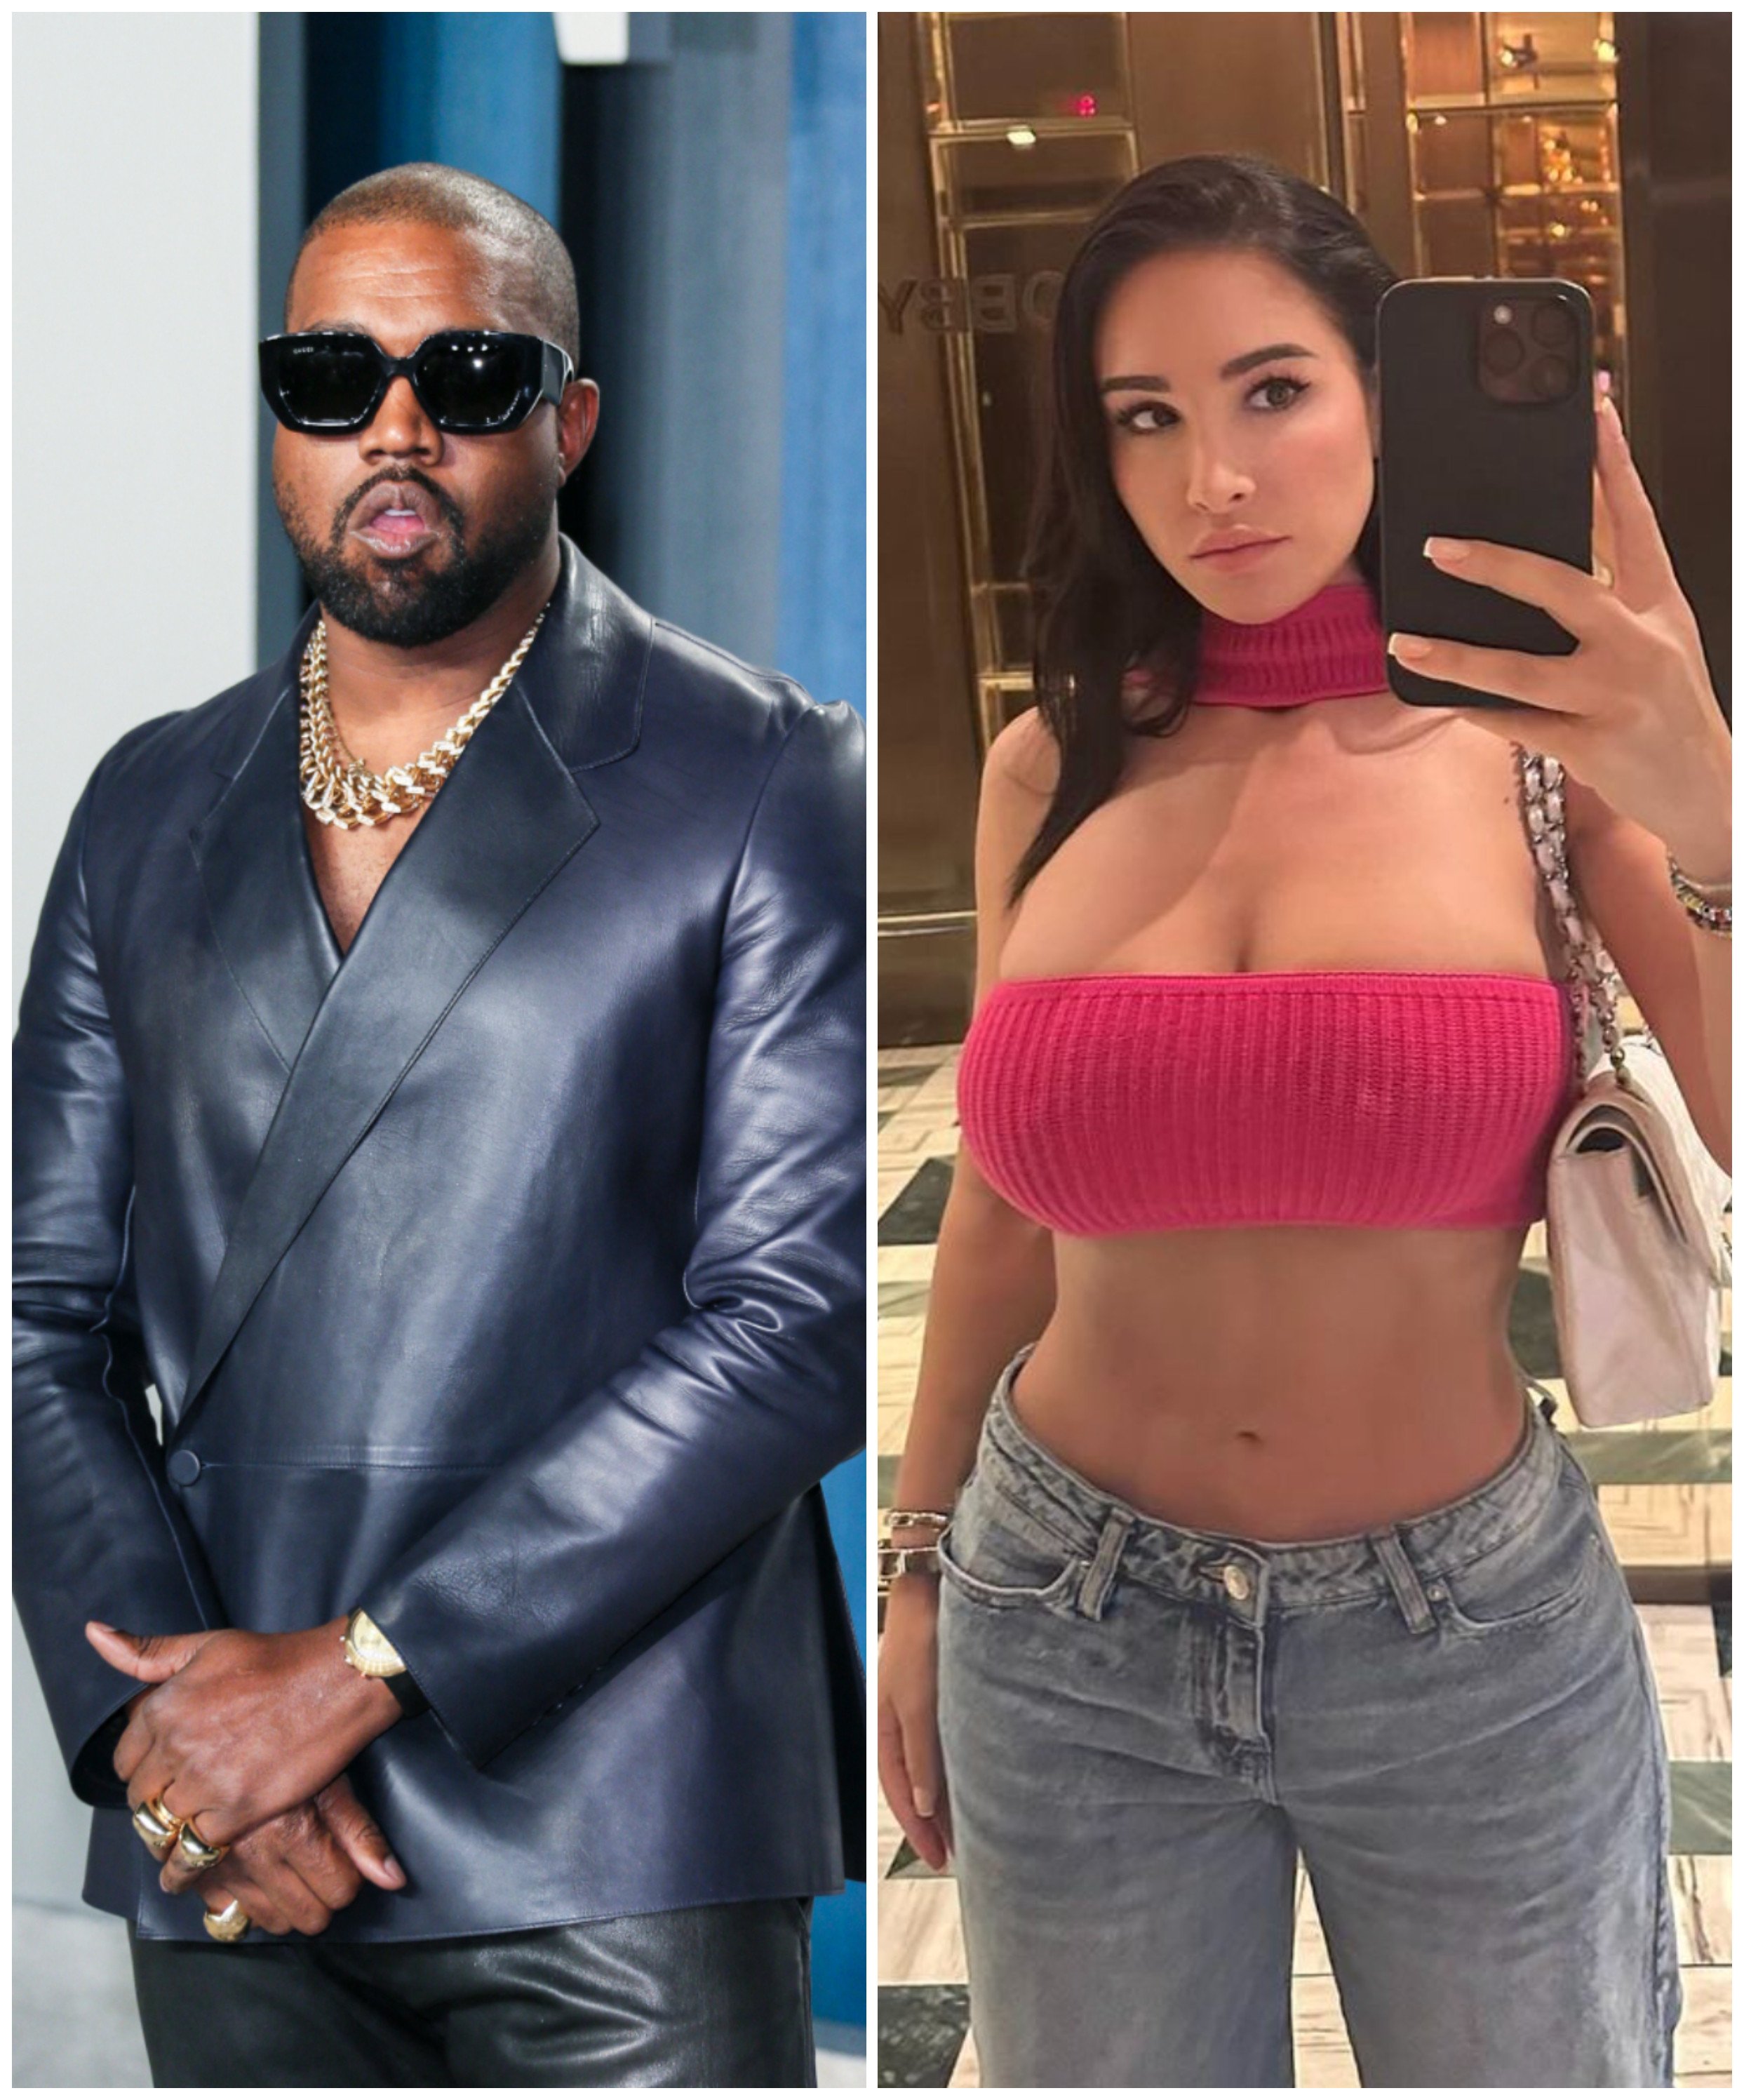 Kanye West, aka Ye, is being sued for sexual harassment and wrongful termination by his former assistant Lauren Pisciotta ... but Kim Kardashian’s ex has denied the allegations. Photos: AFP, @laurenpisciotta/Instagram